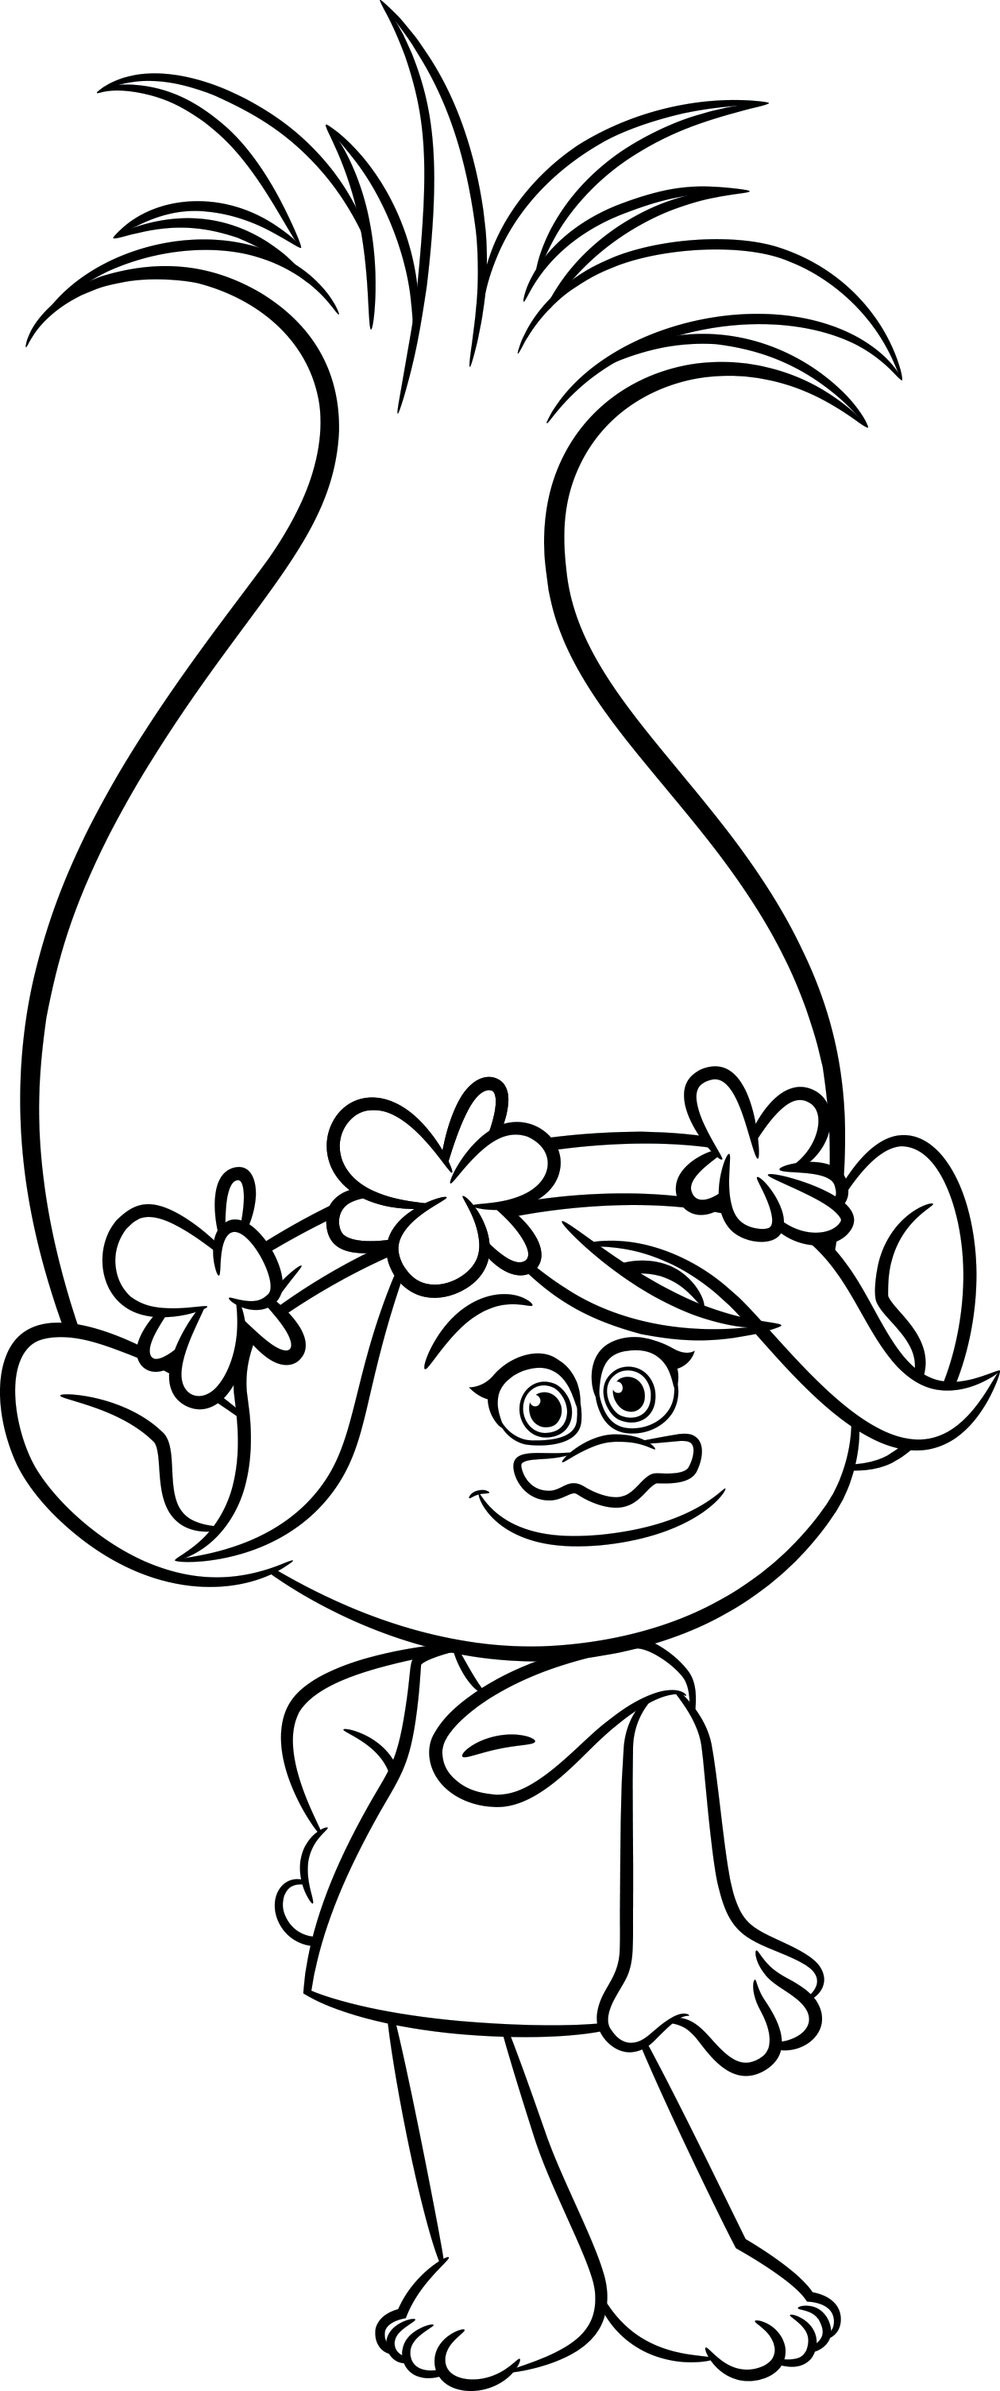 Poppy Trolls Coloring Pages
 Trolls Poppy Movie Biggie 2016 Dreamworks Sketch Coloring Page